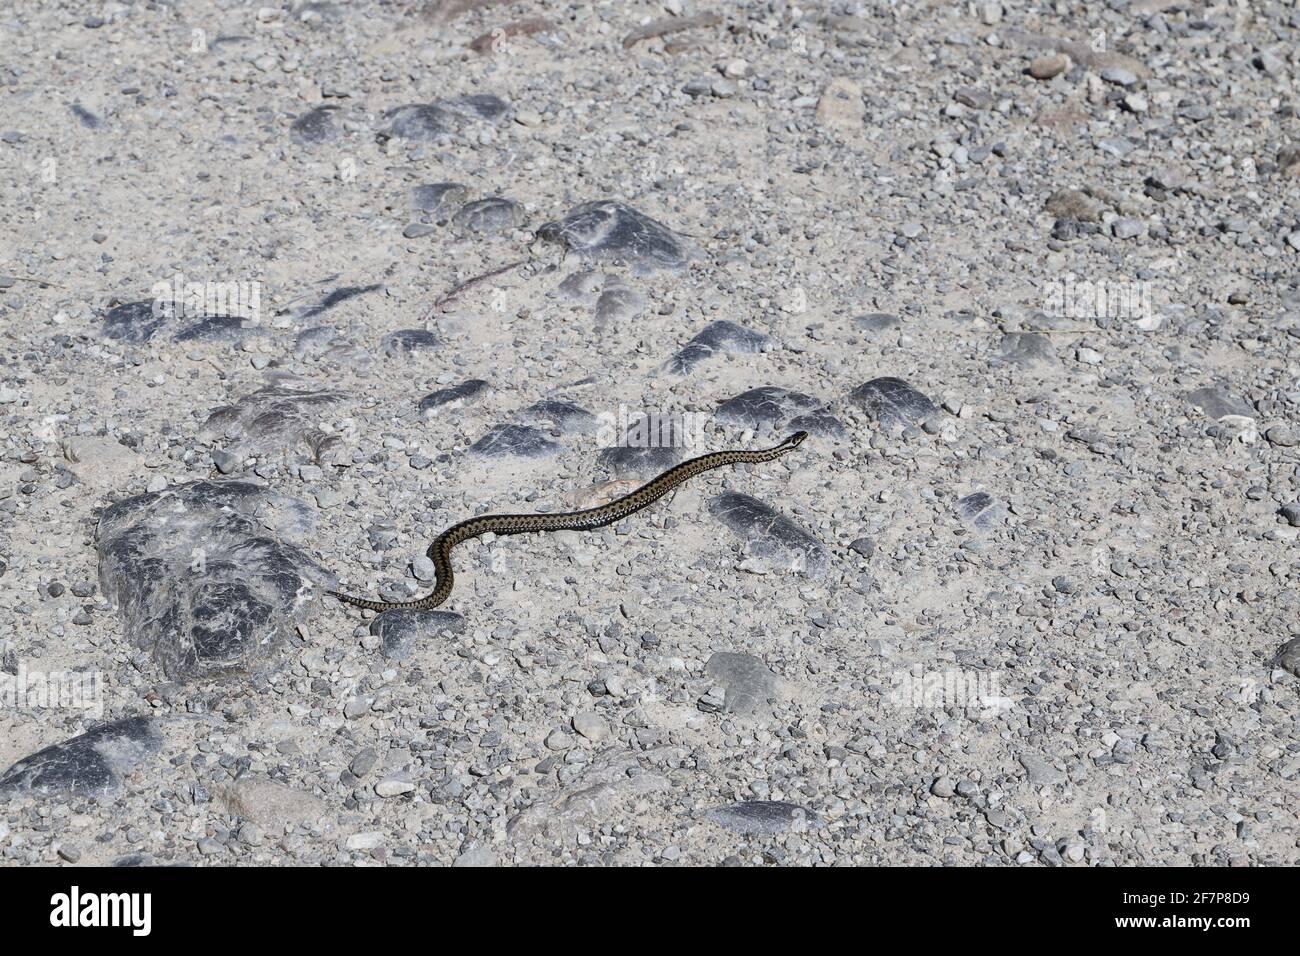 A snake on the hiking trail in the Koscieliska valley in the Western Tatras. Animals of the Tatra National Park, Poland Stock Photo